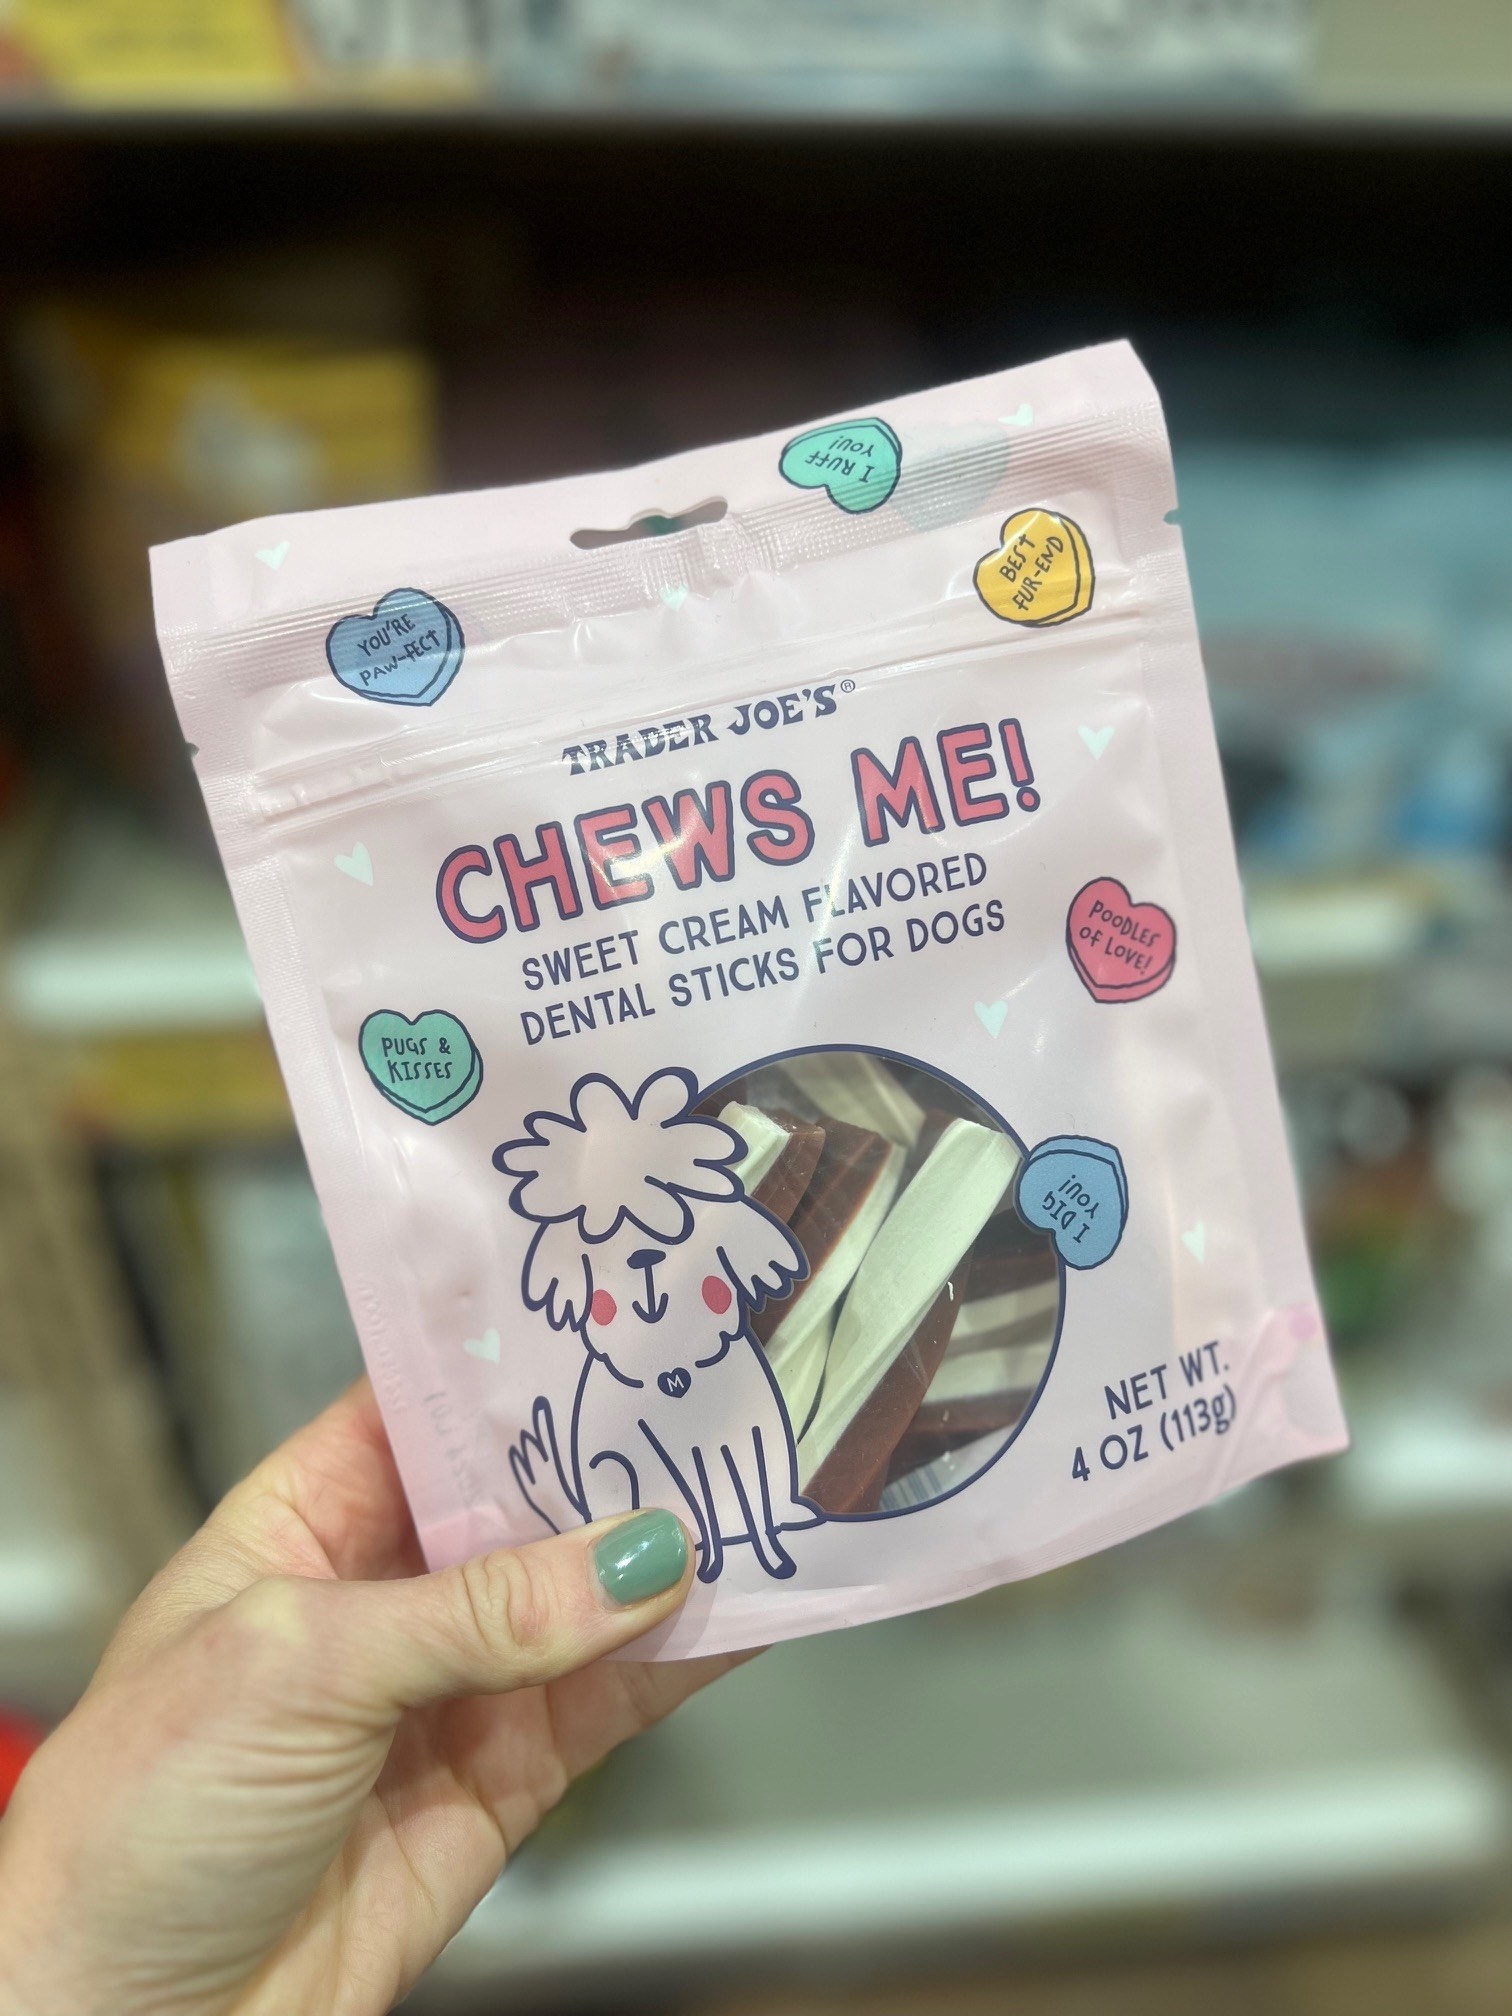 Chews Me! Sweet Cream Flavored Dental Sticks for Dogs